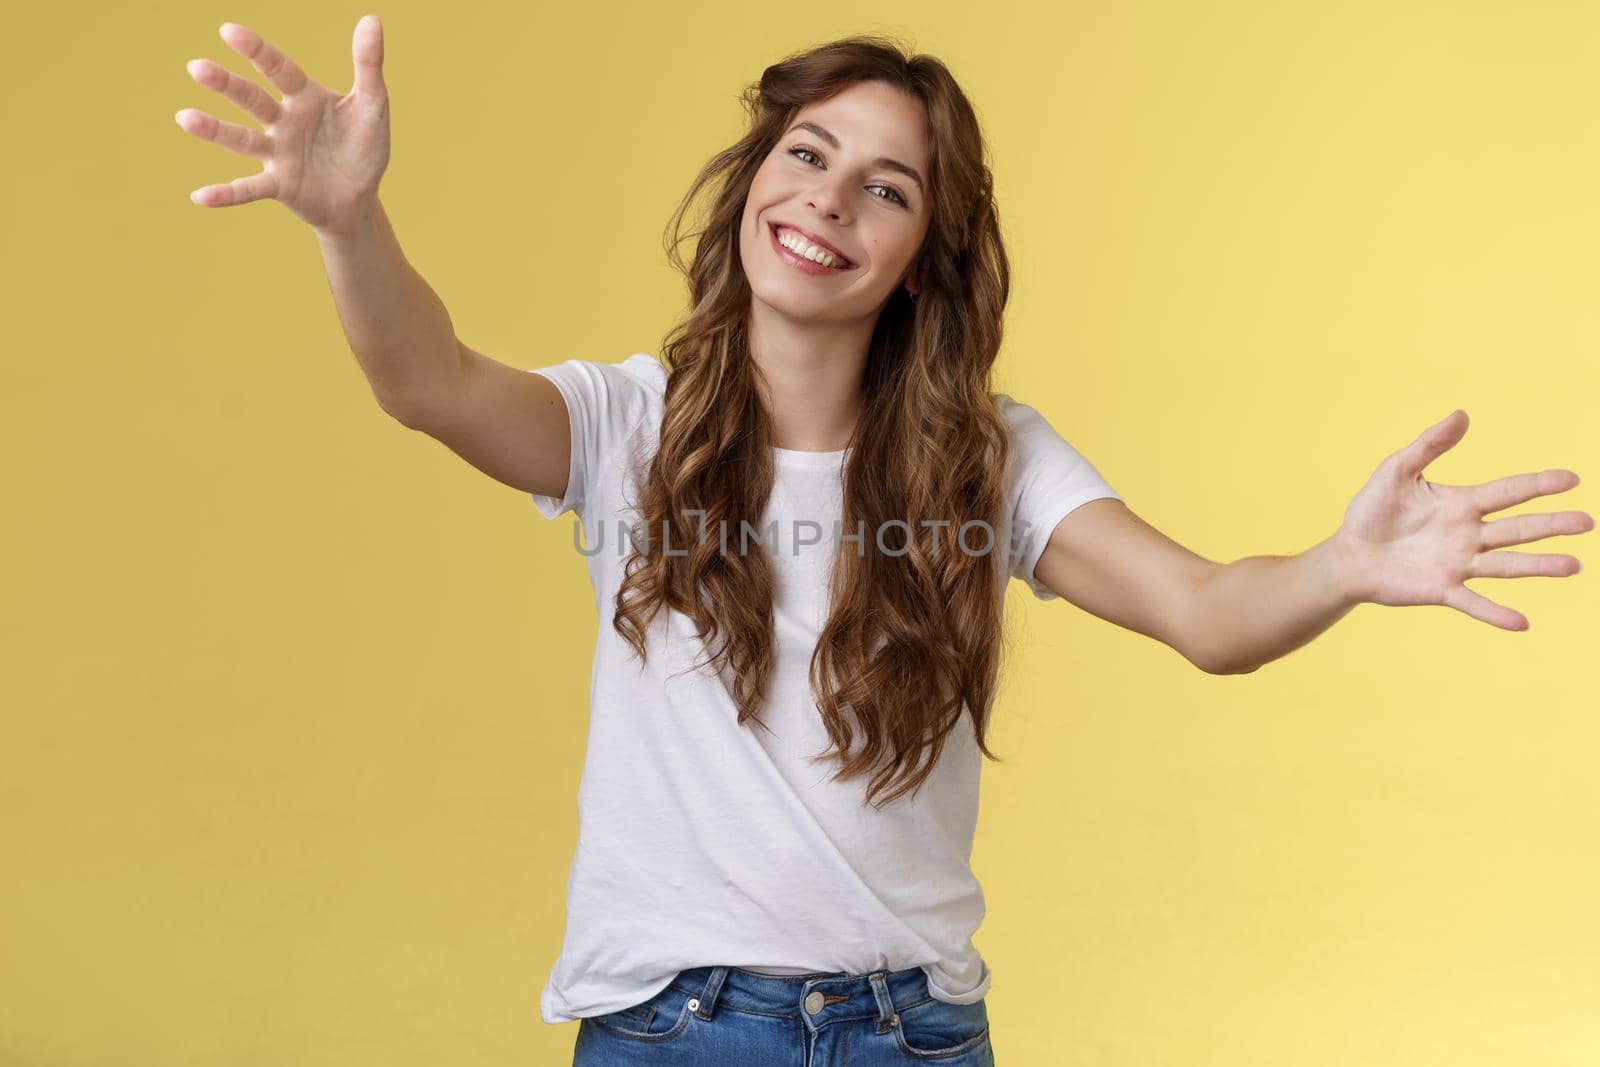 Wanna hold you tight. Romantic sincere gentle cute caucasian girl long beautiful curly hair tilt head lovely extend arms give cuddles wanna hug friend embracing dear guests yellow background.